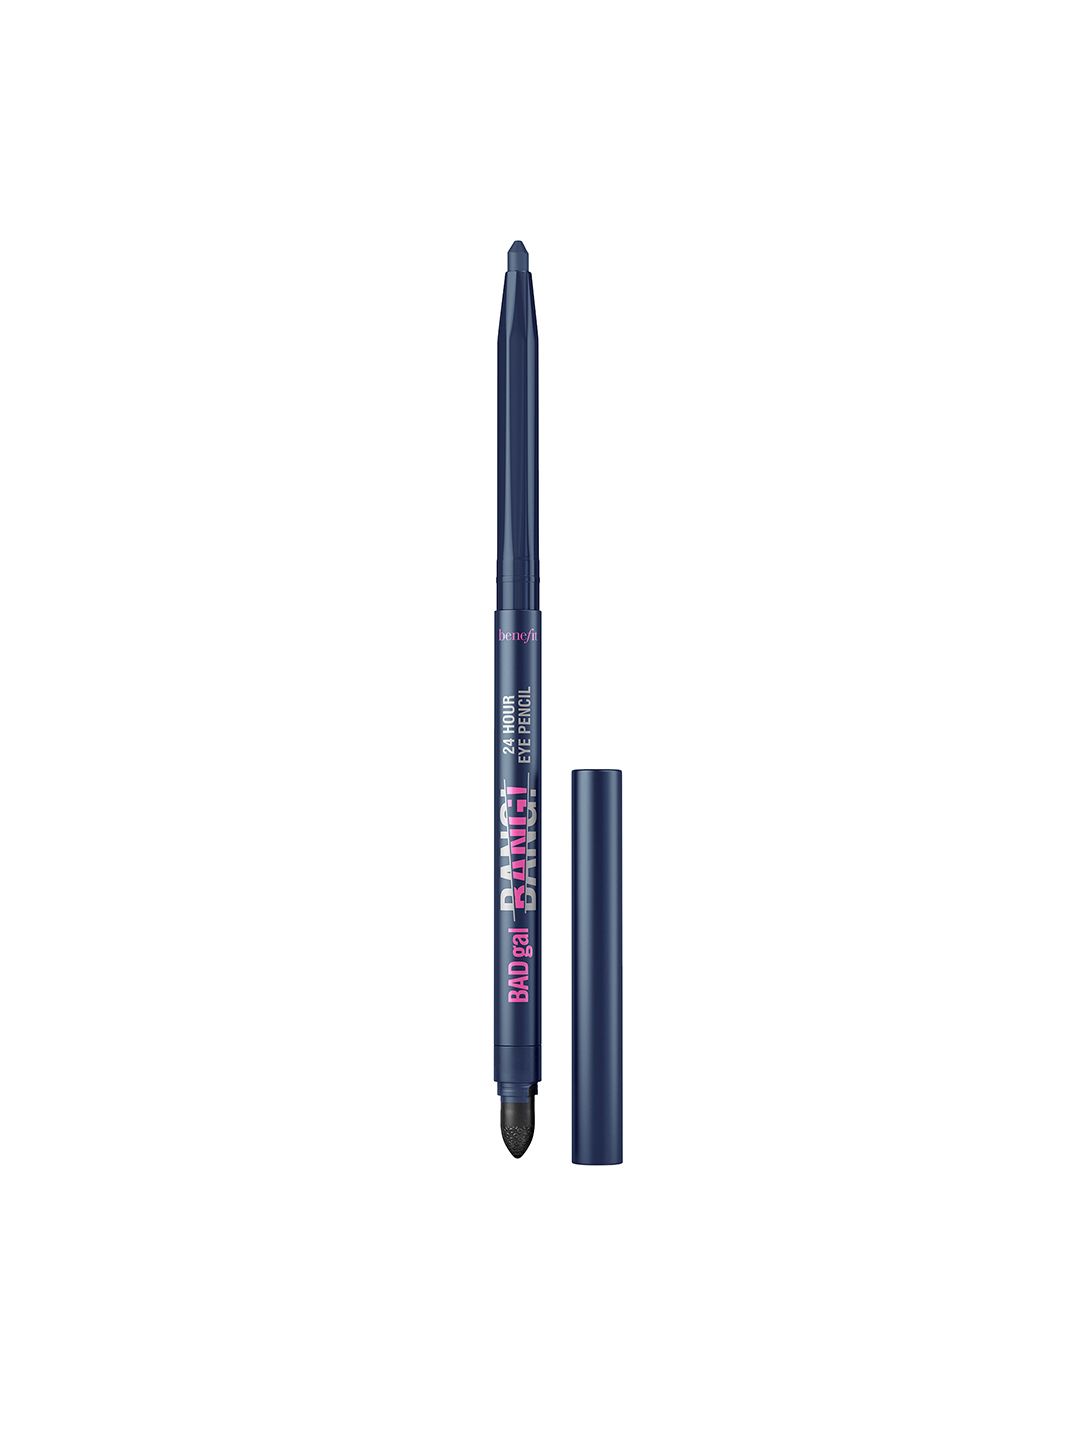 Benefit Cosmetics BADgal Bang 24 Hr Eye Pencil - Midnight Blue 0.25 g Price in India